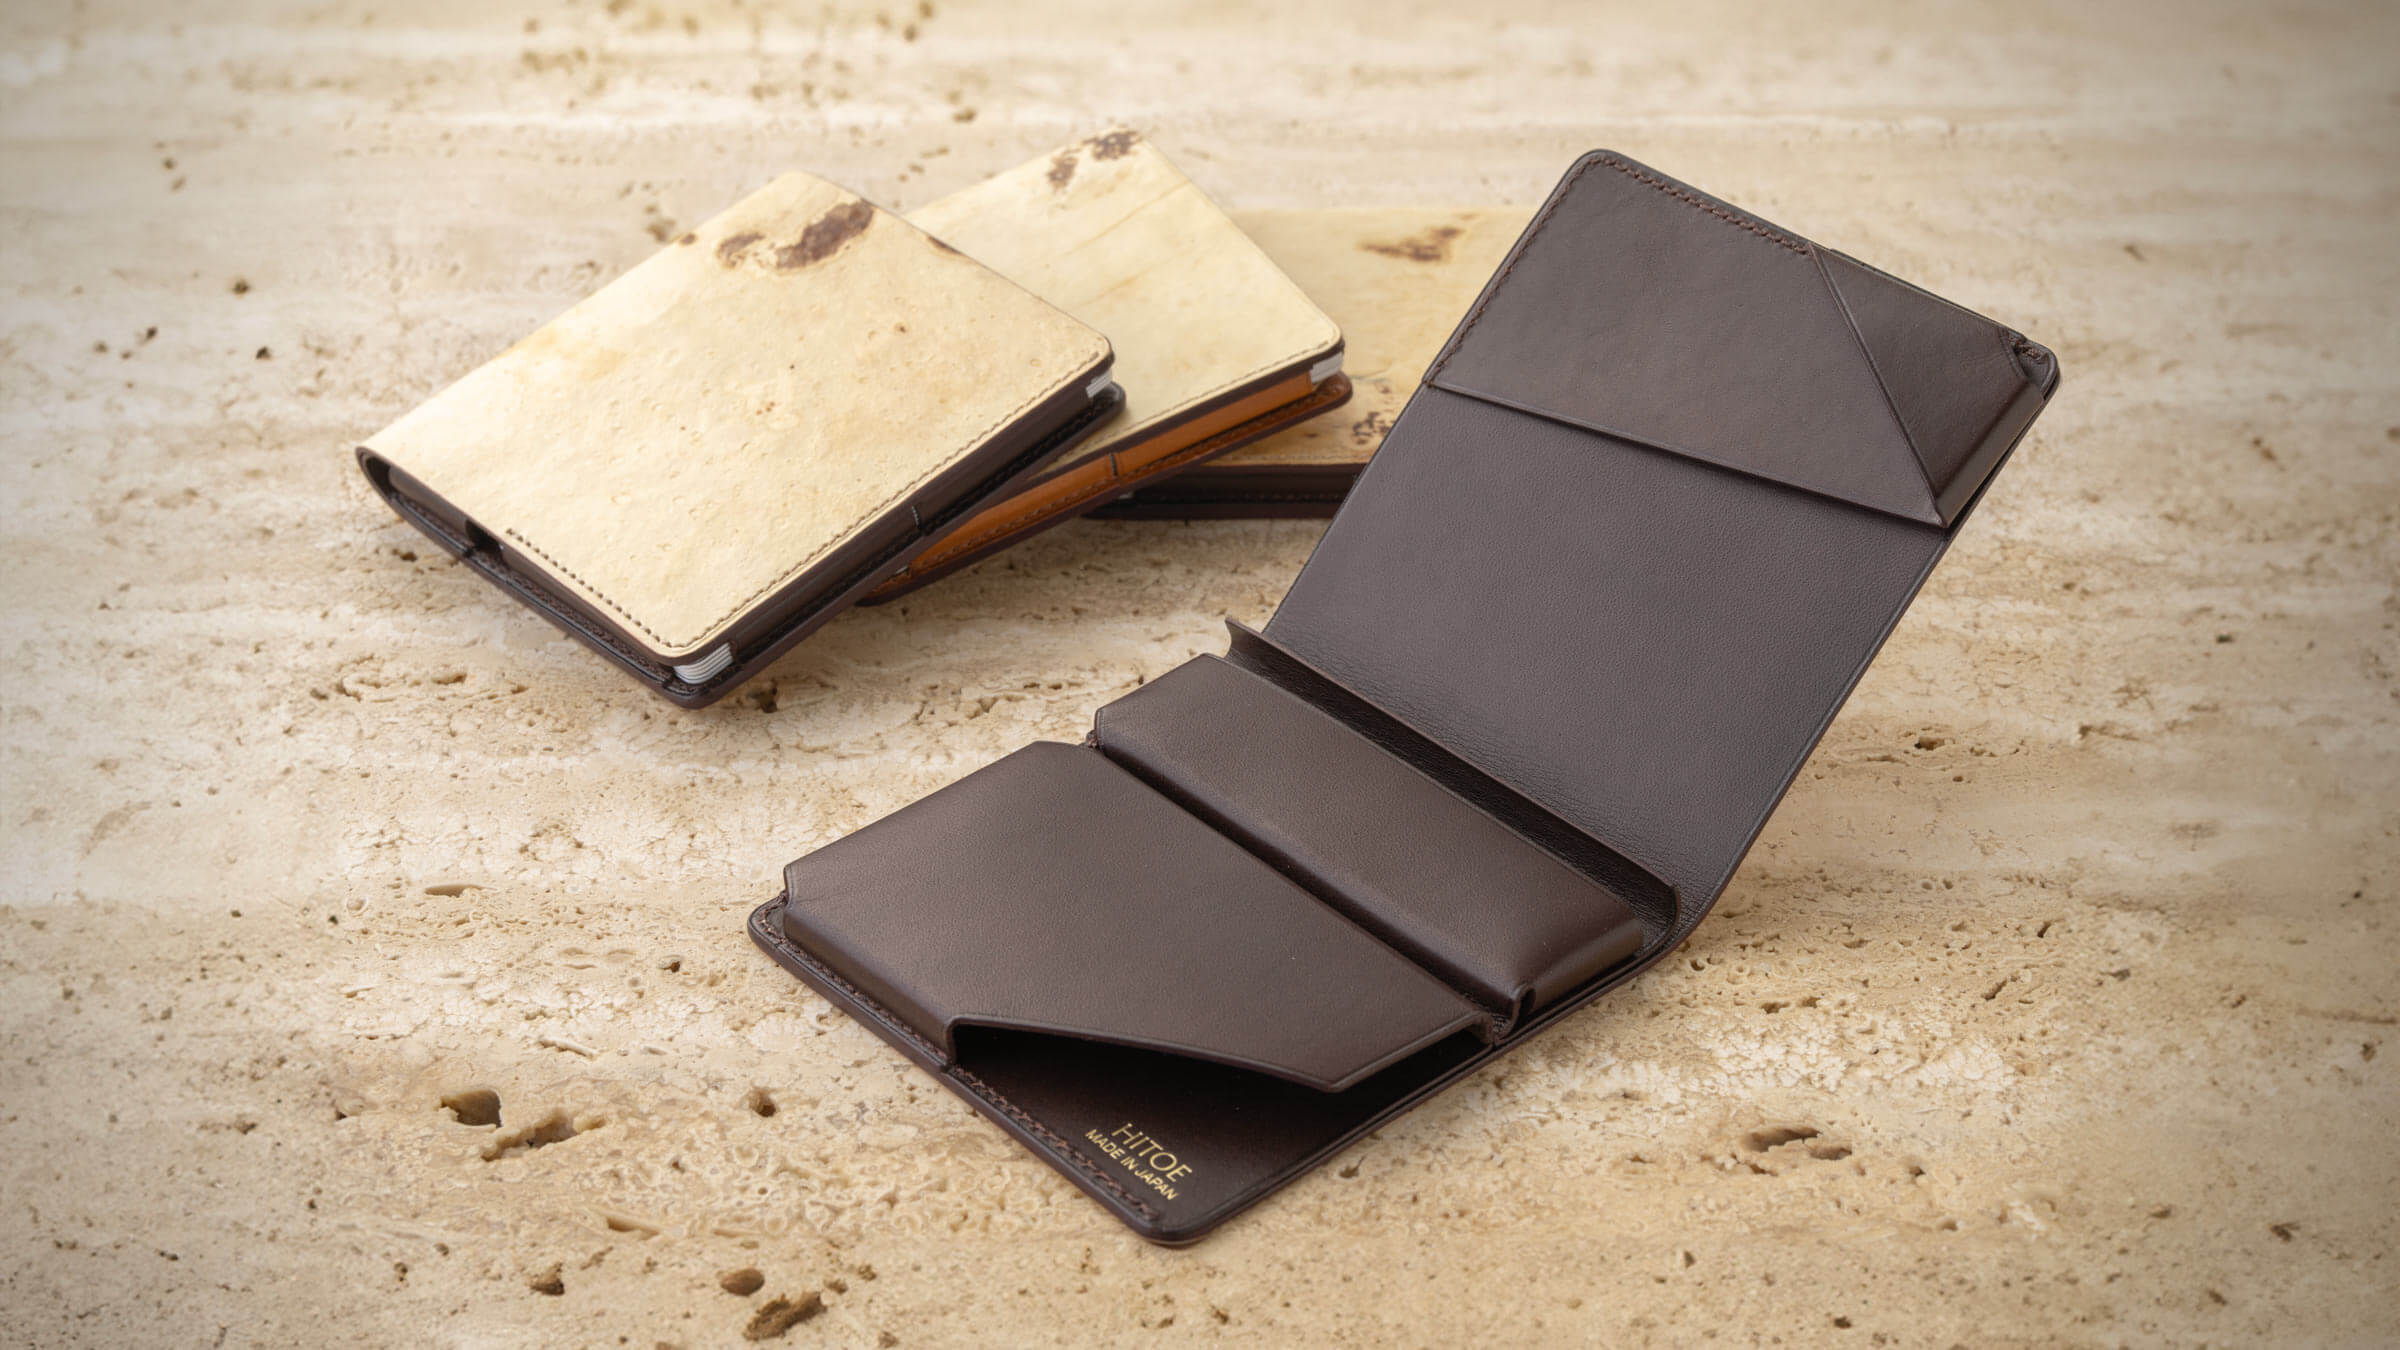 Thin wallets with minimalism at its finest. SYRINX